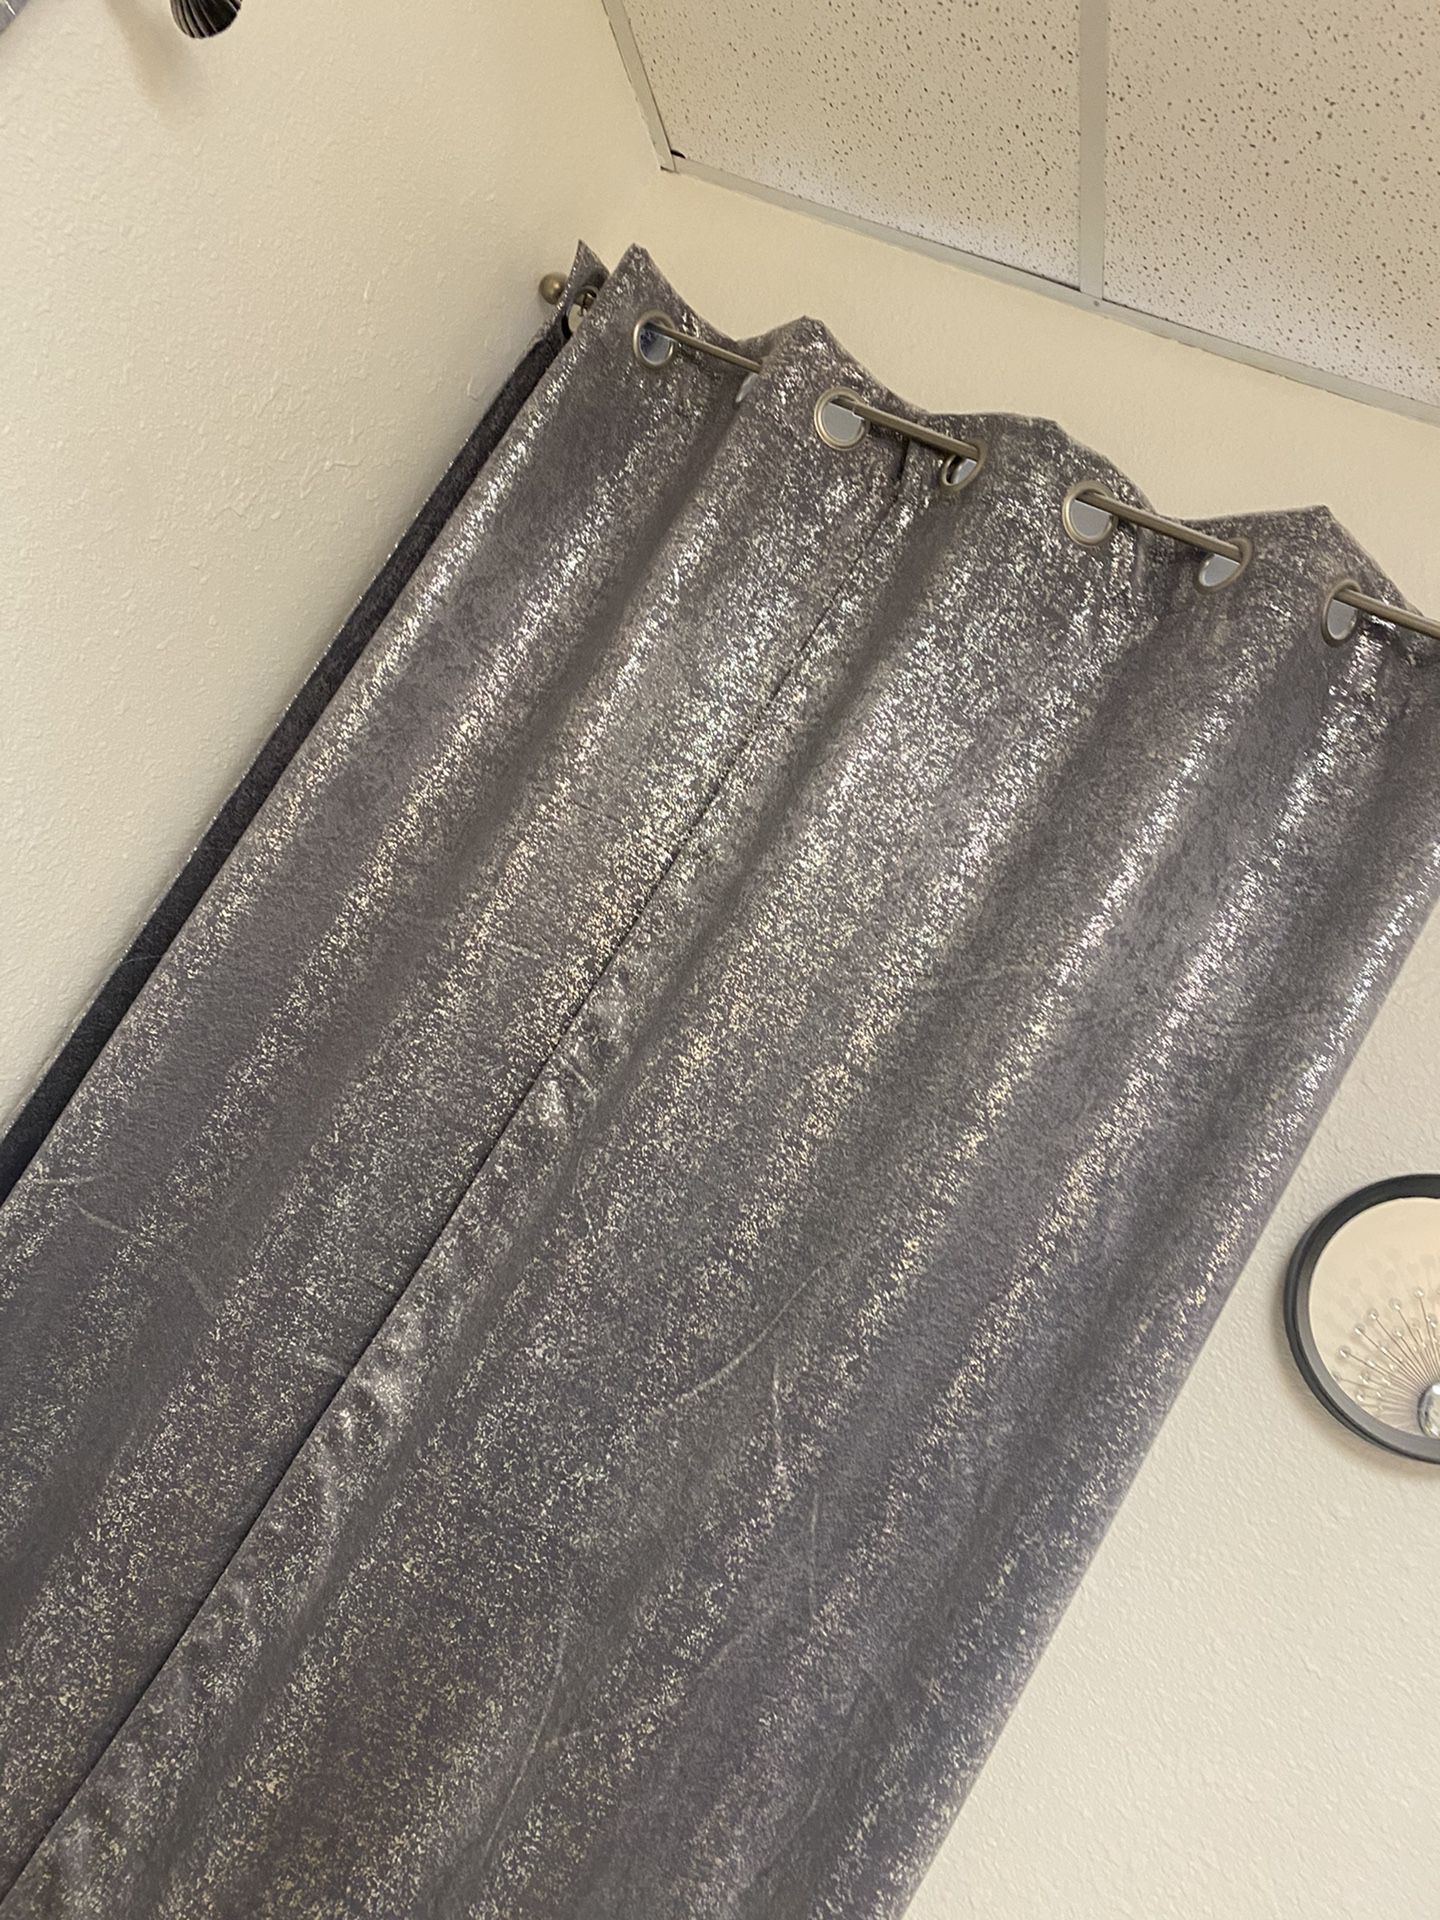 Bling curtains